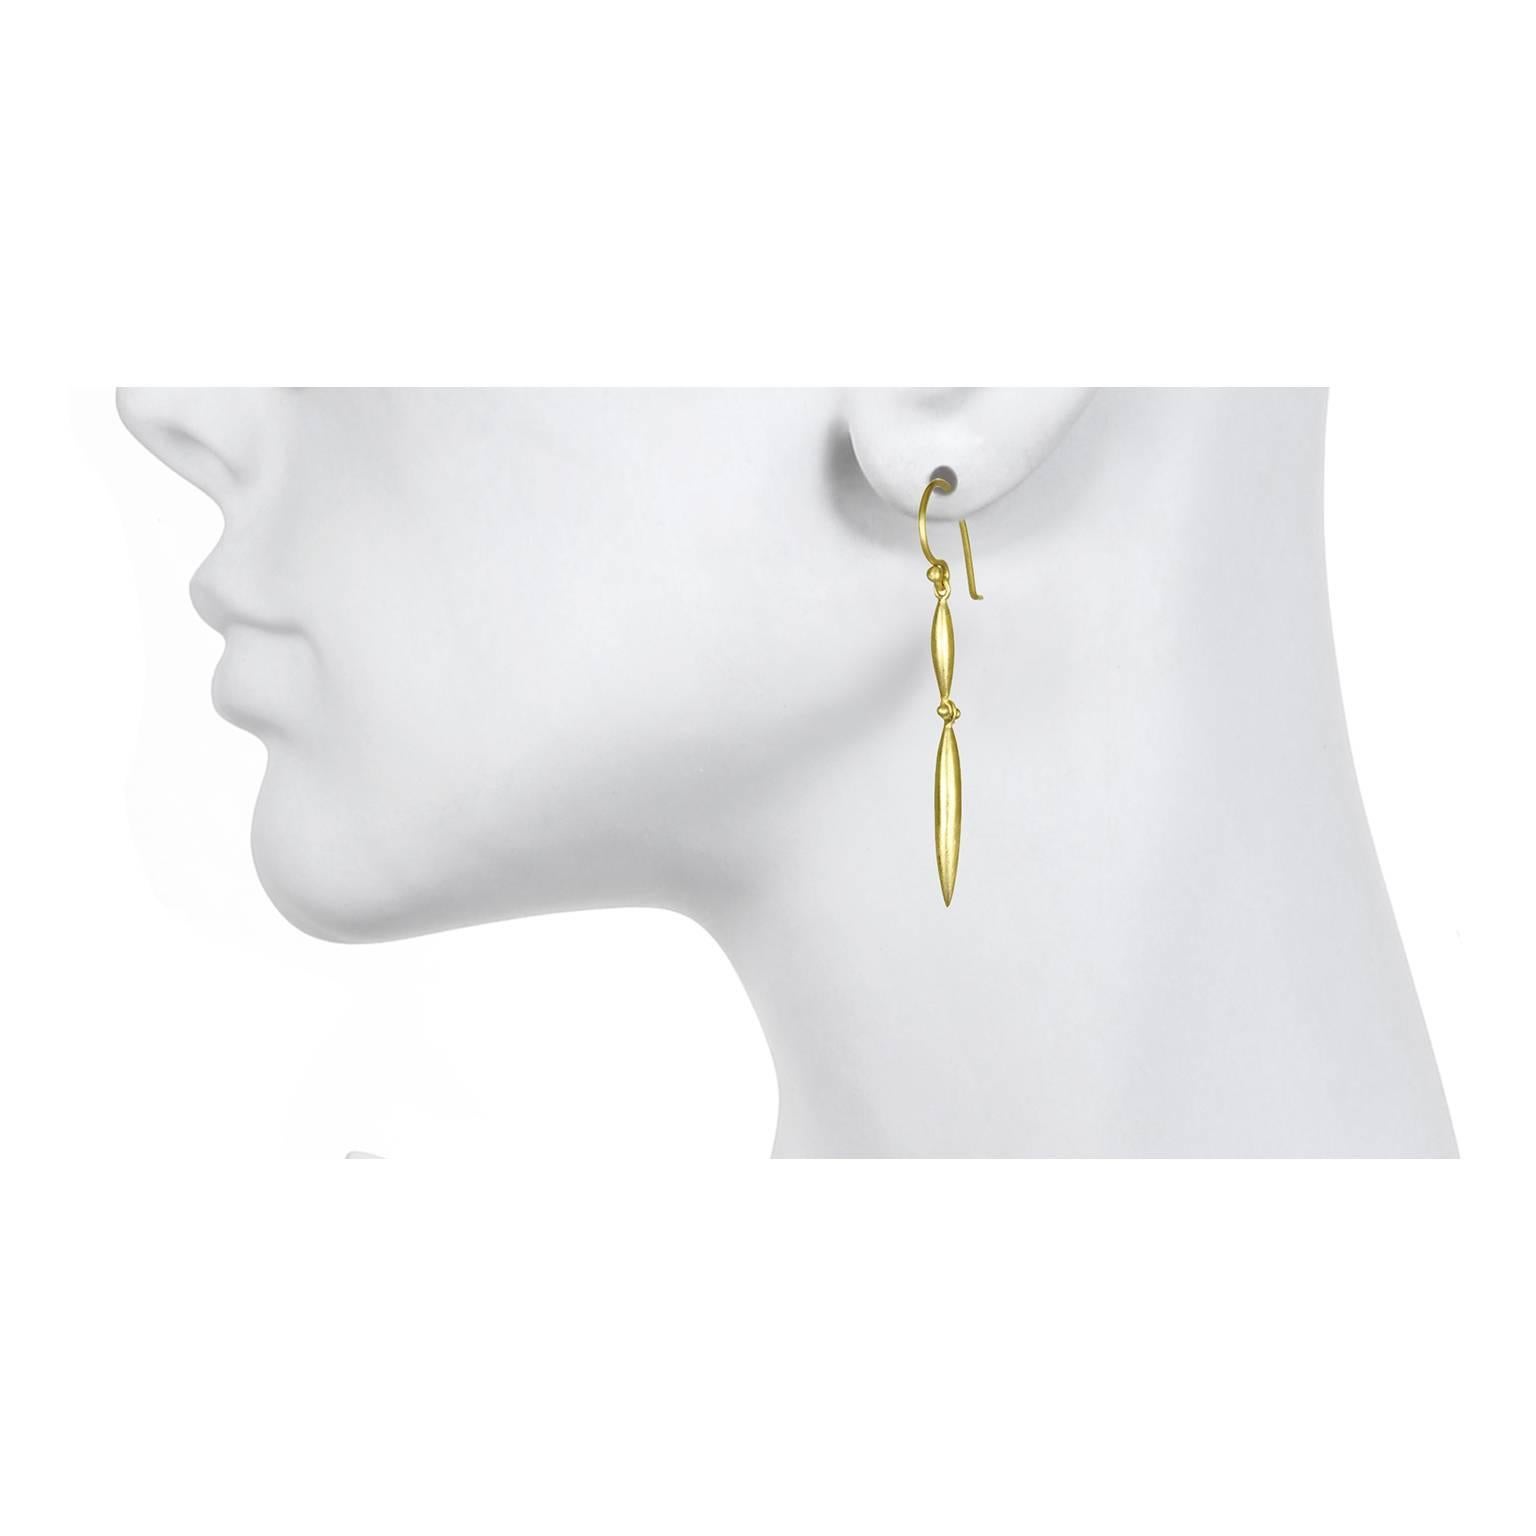 18k gold double torpedo drop earrings are sleek and sophisticated with a matte finish.  The earrings feature a granulation hinge that makes them fluid with movement when worn.  2 inch long  French ear wires

